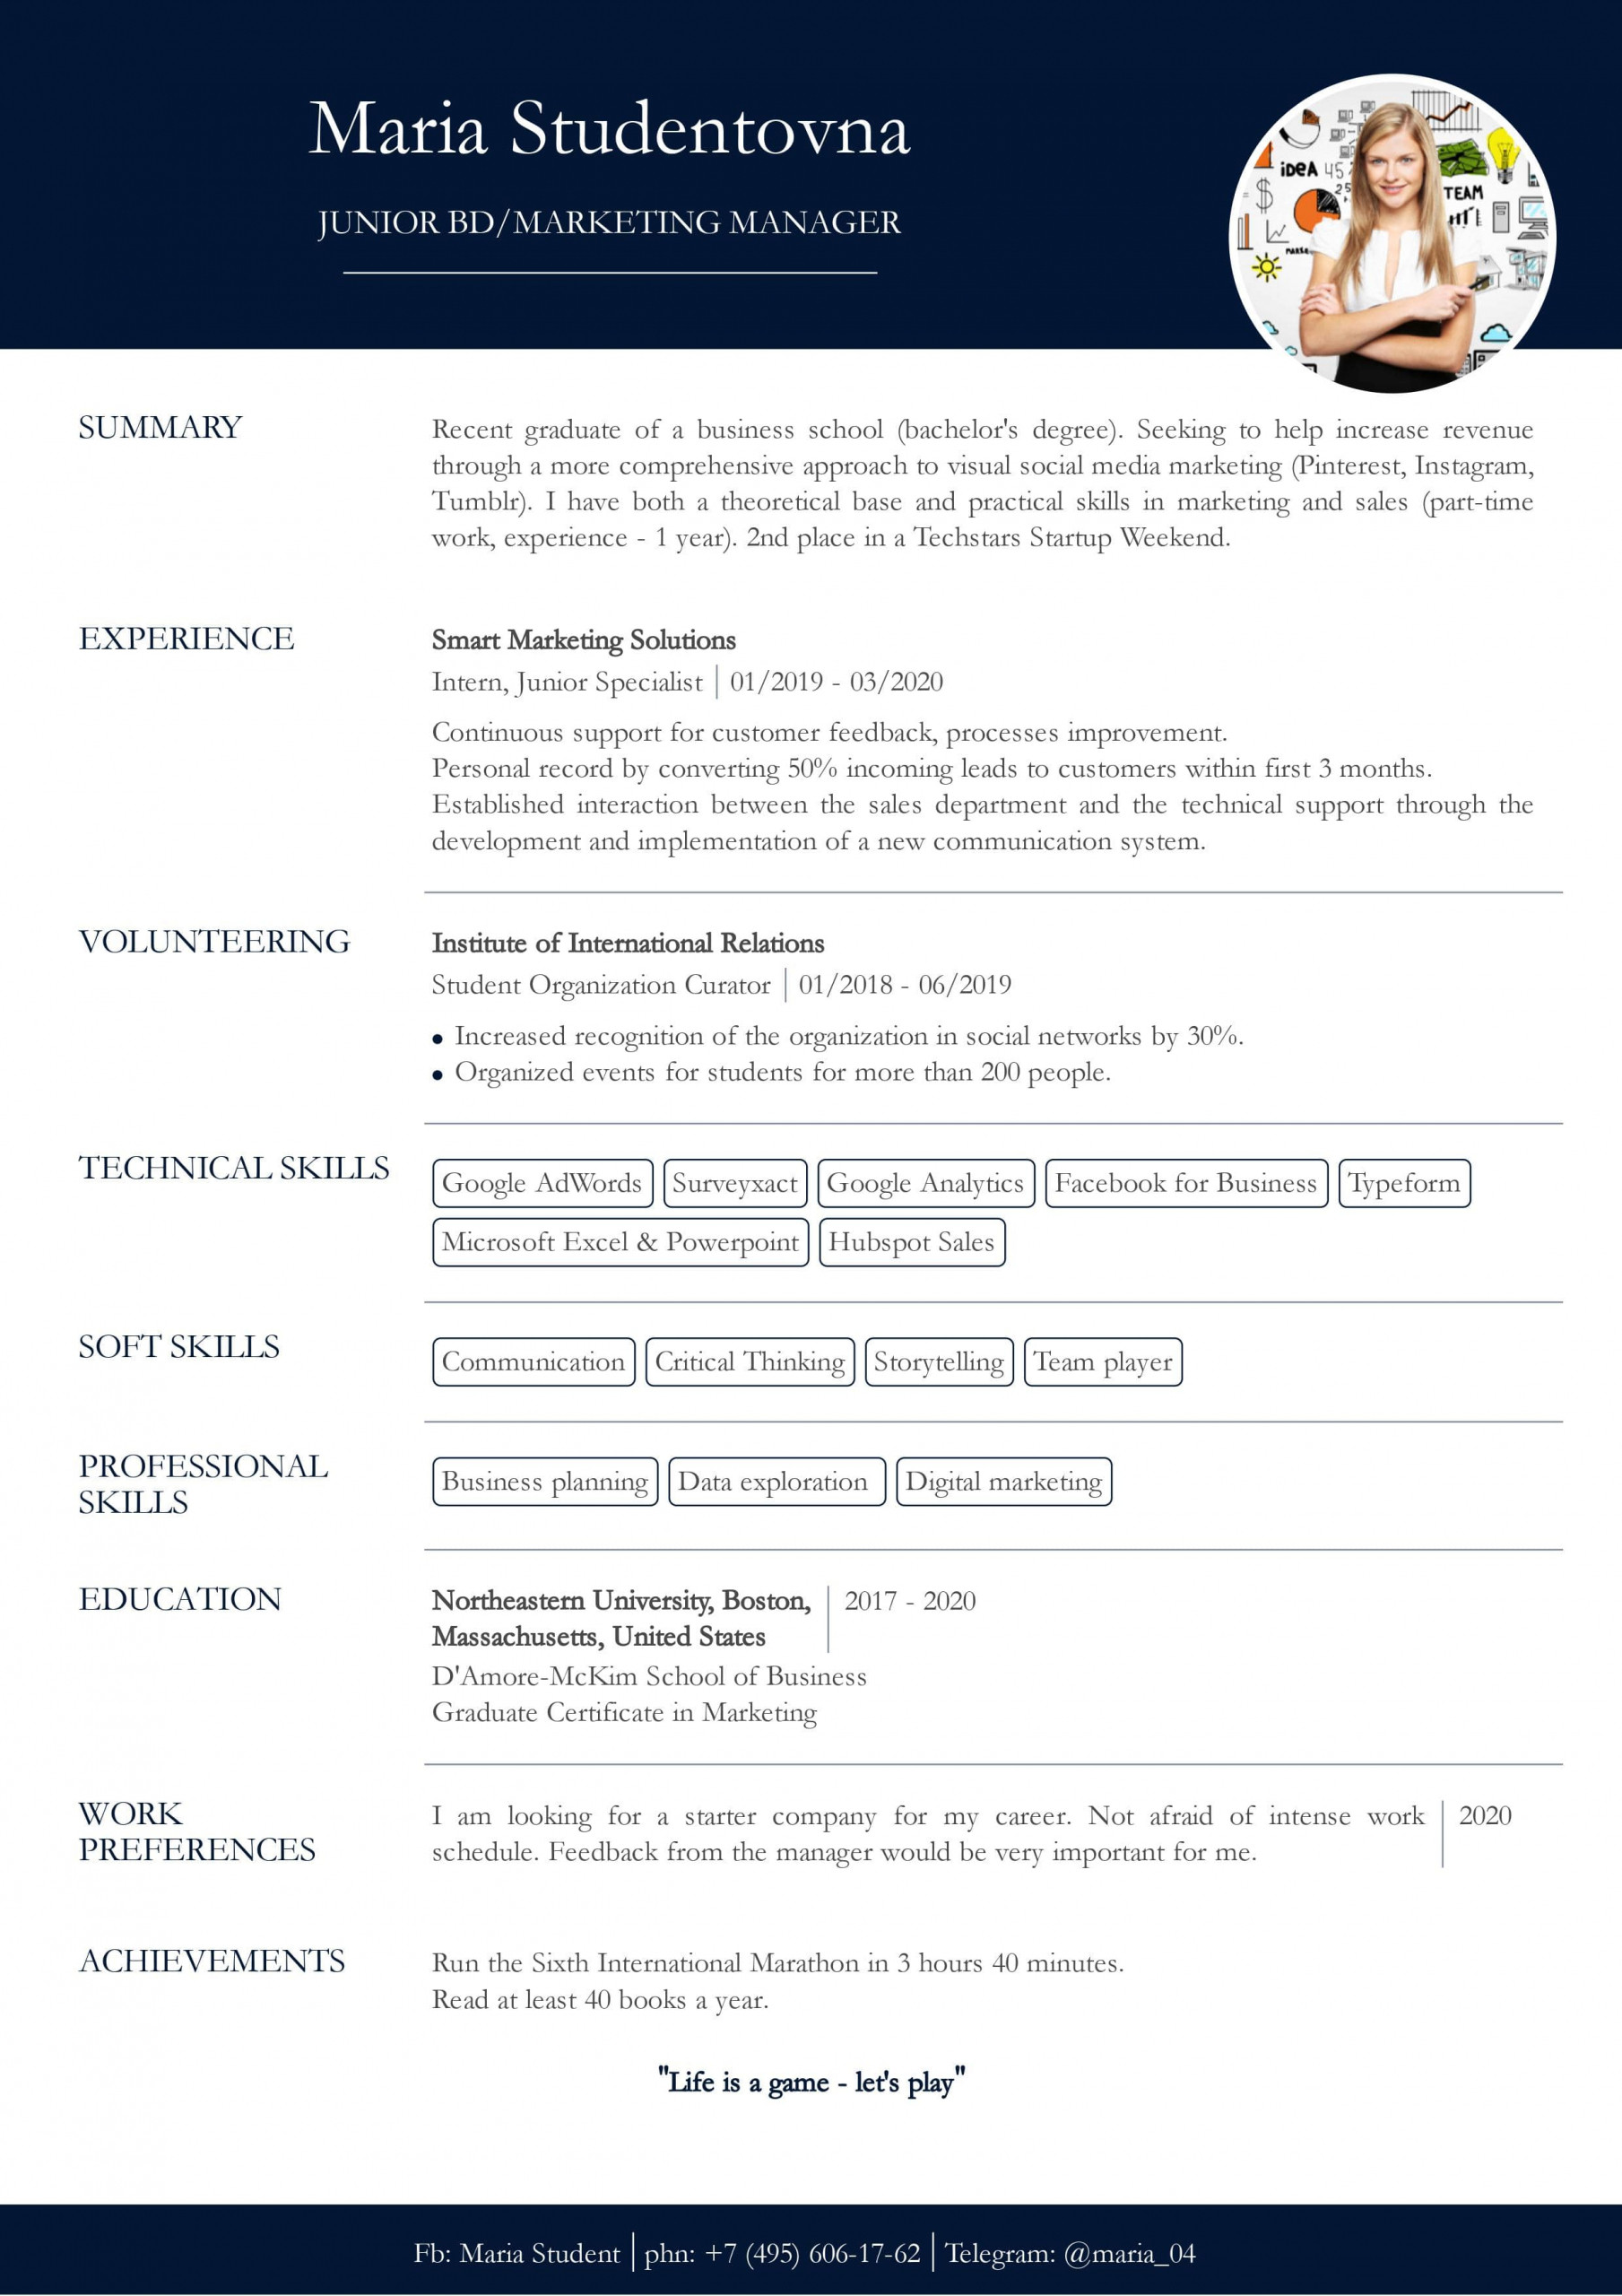 Resume Template First Job No Experience Resume with No Work Experience. Sample for Students. – Cv2you Blog